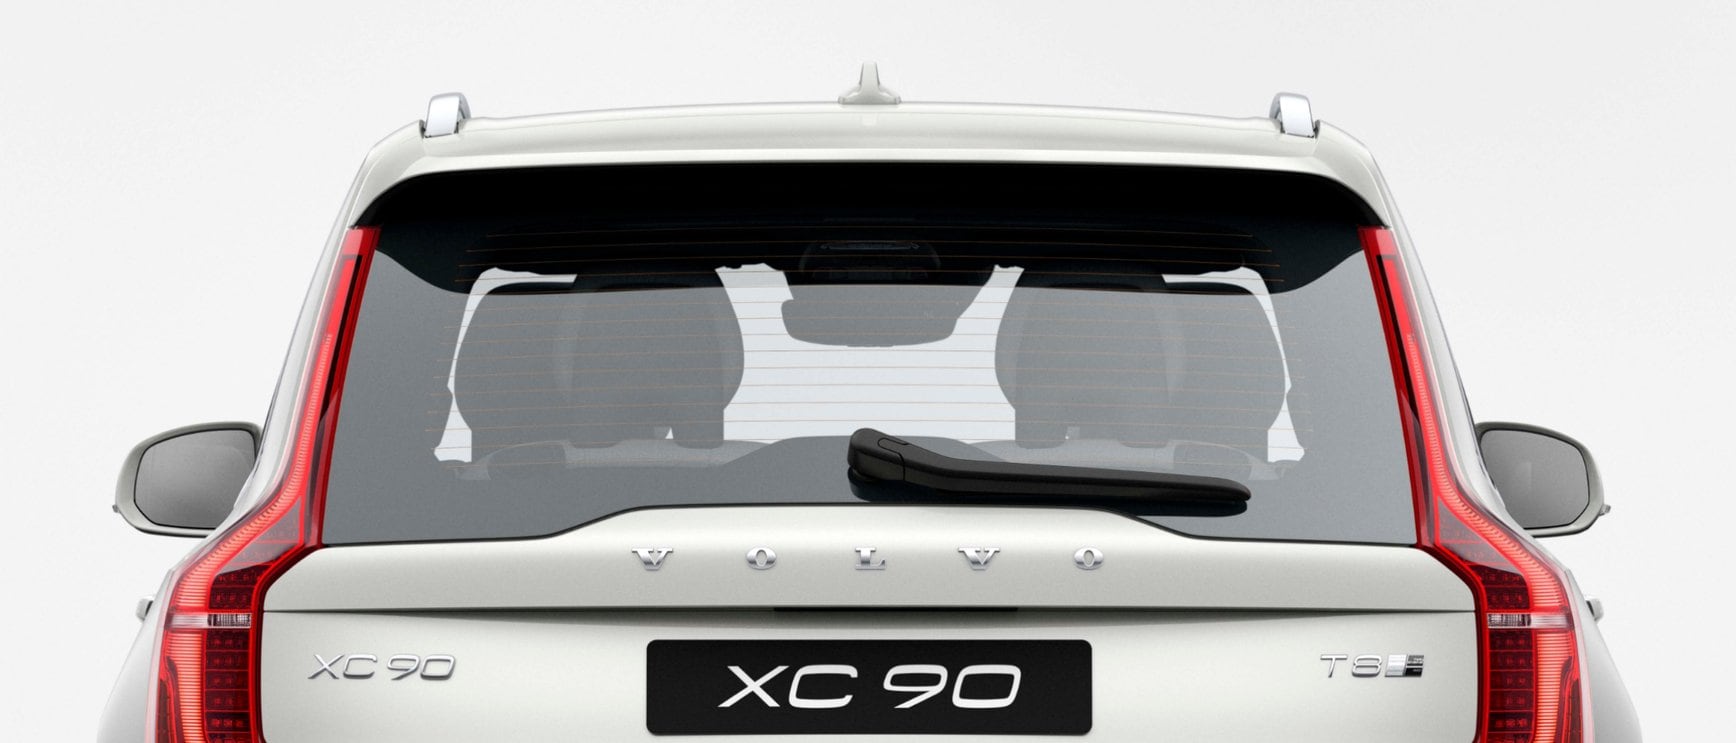 Photograph of the rear of a Volvo XC90, showing the physical Volvo Spread Word Mark applied to the bodywork.